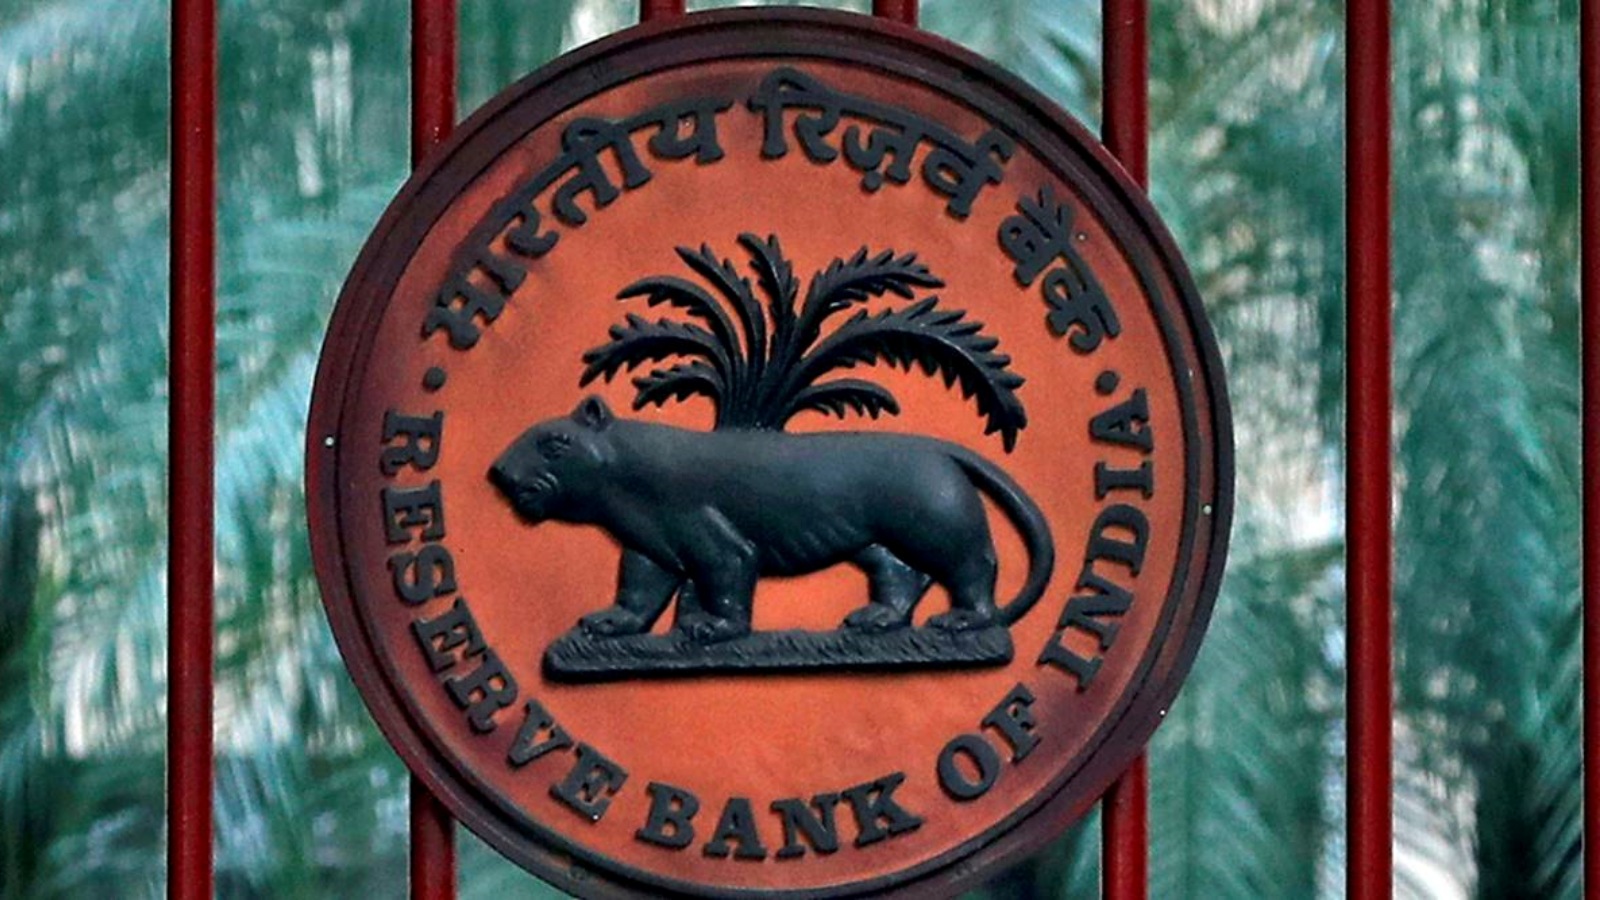 Read RBI's BIG announcement before selling your old coins, currency notes